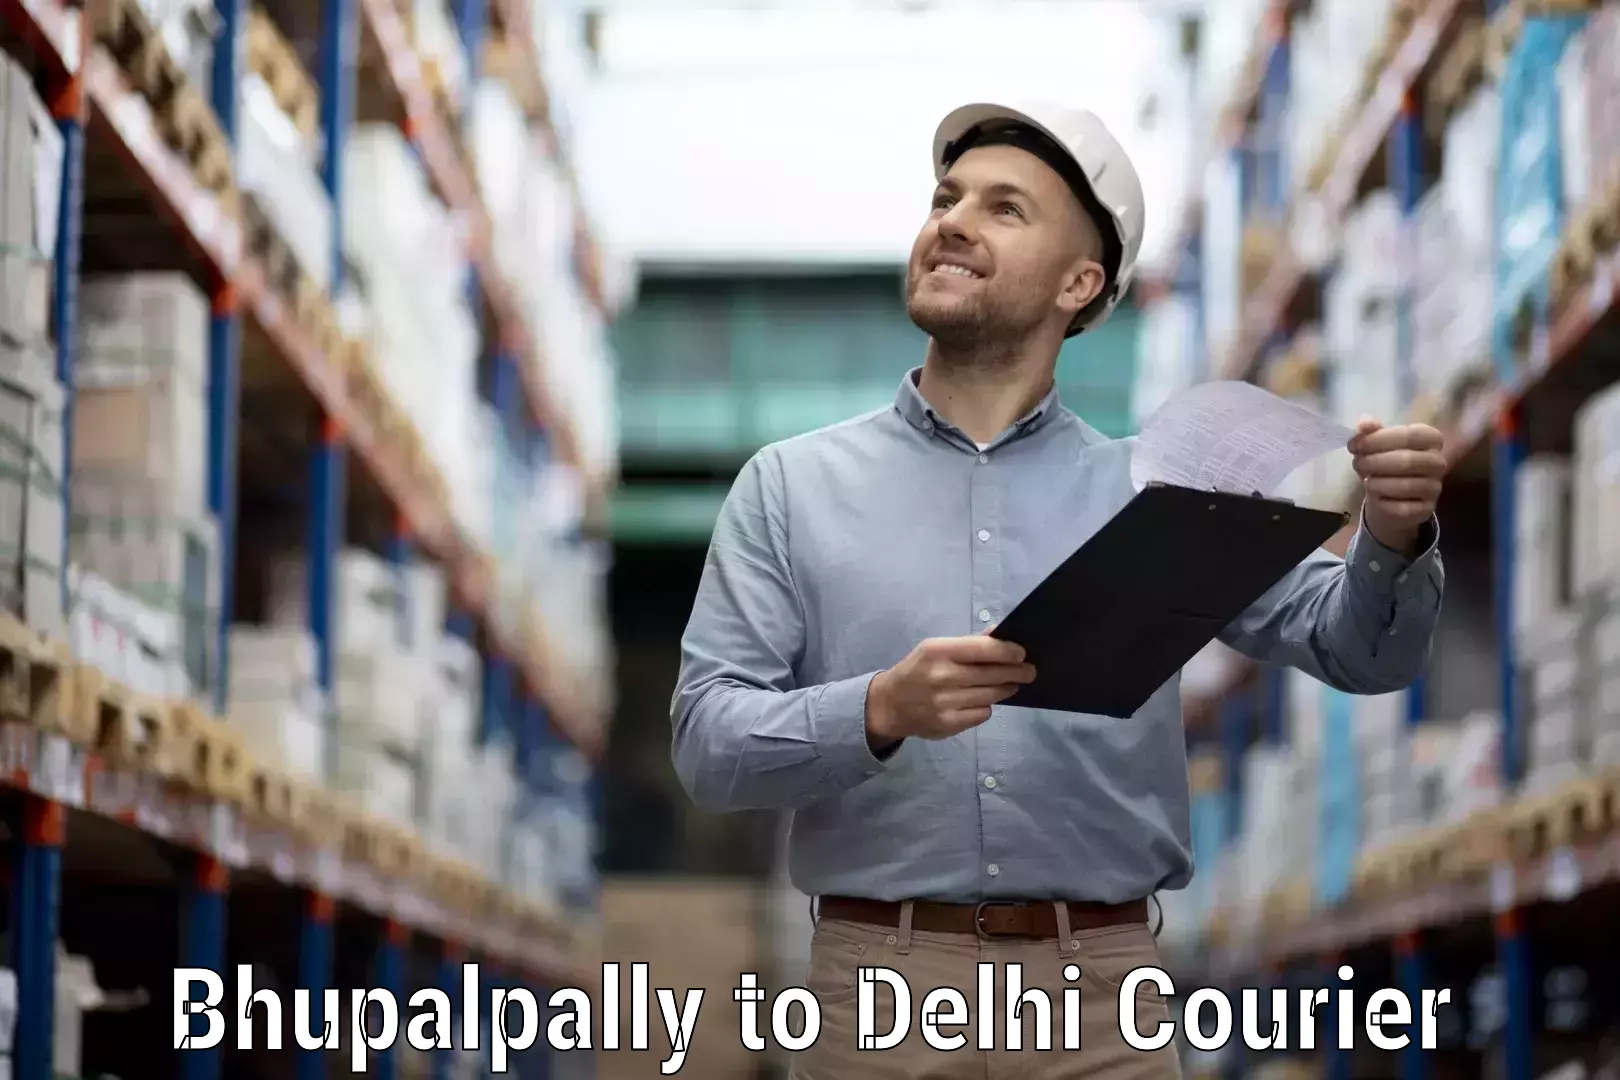 Efficient order fulfillment Bhupalpally to Lodhi Road